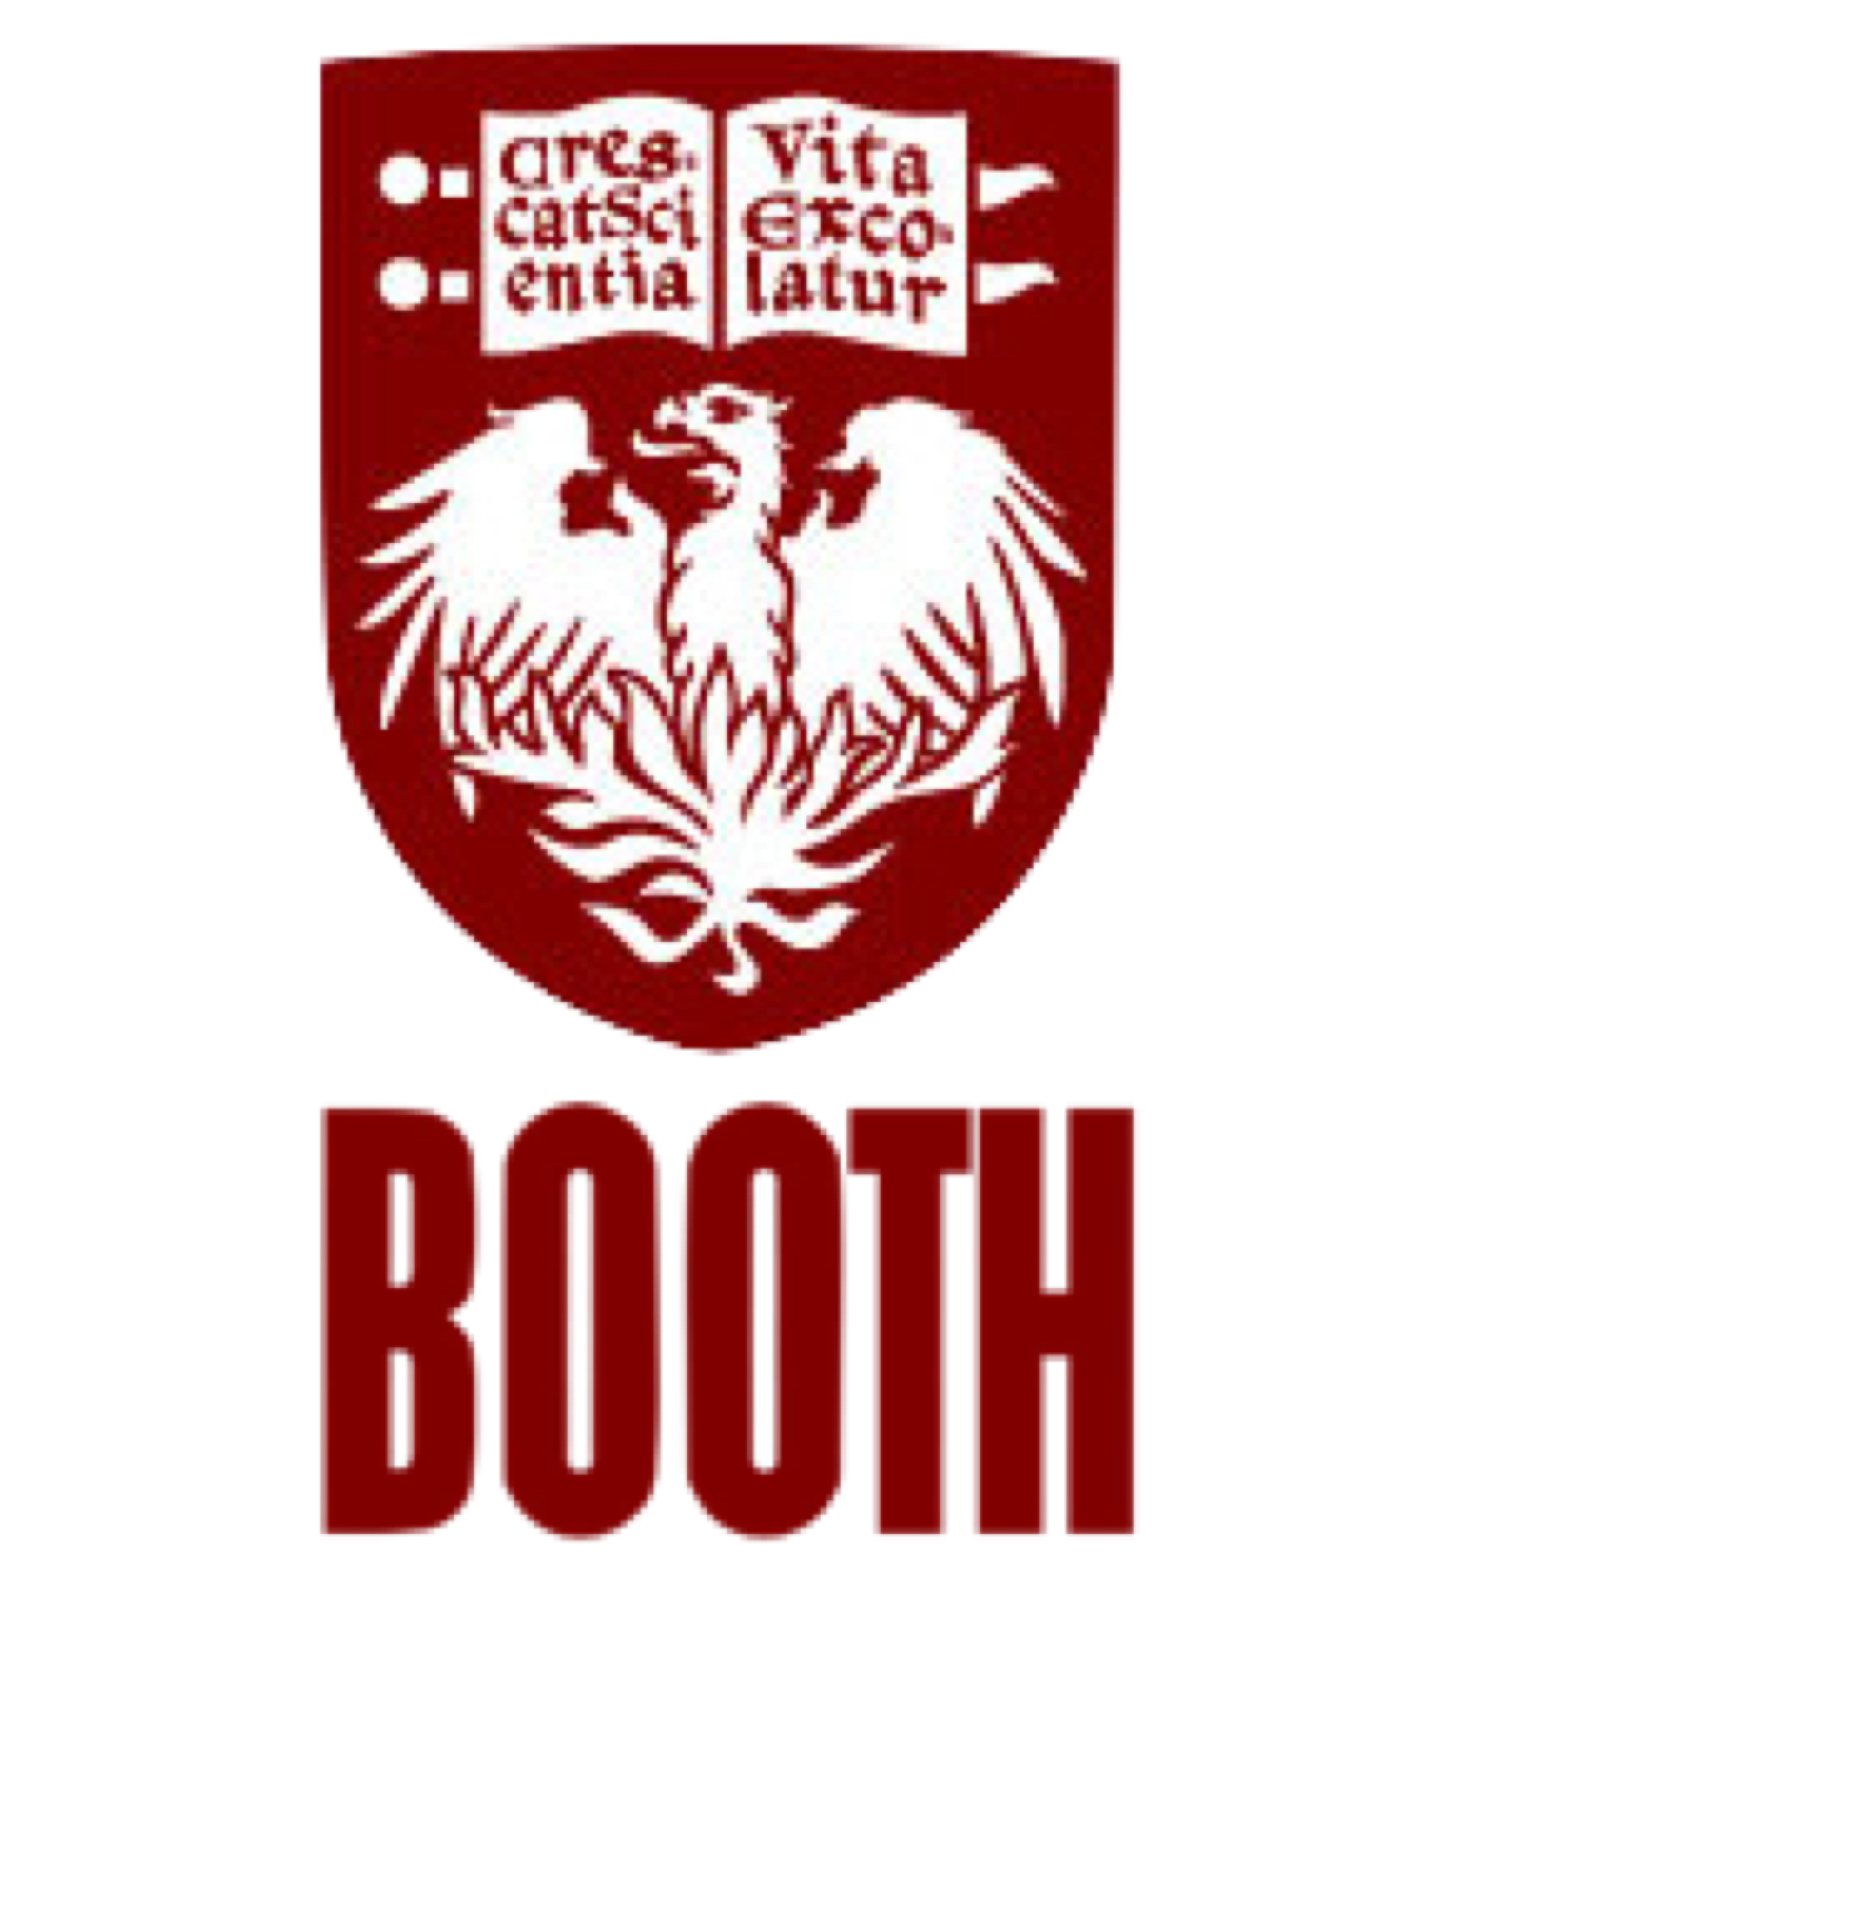 Booth School of Business - University of Chicago